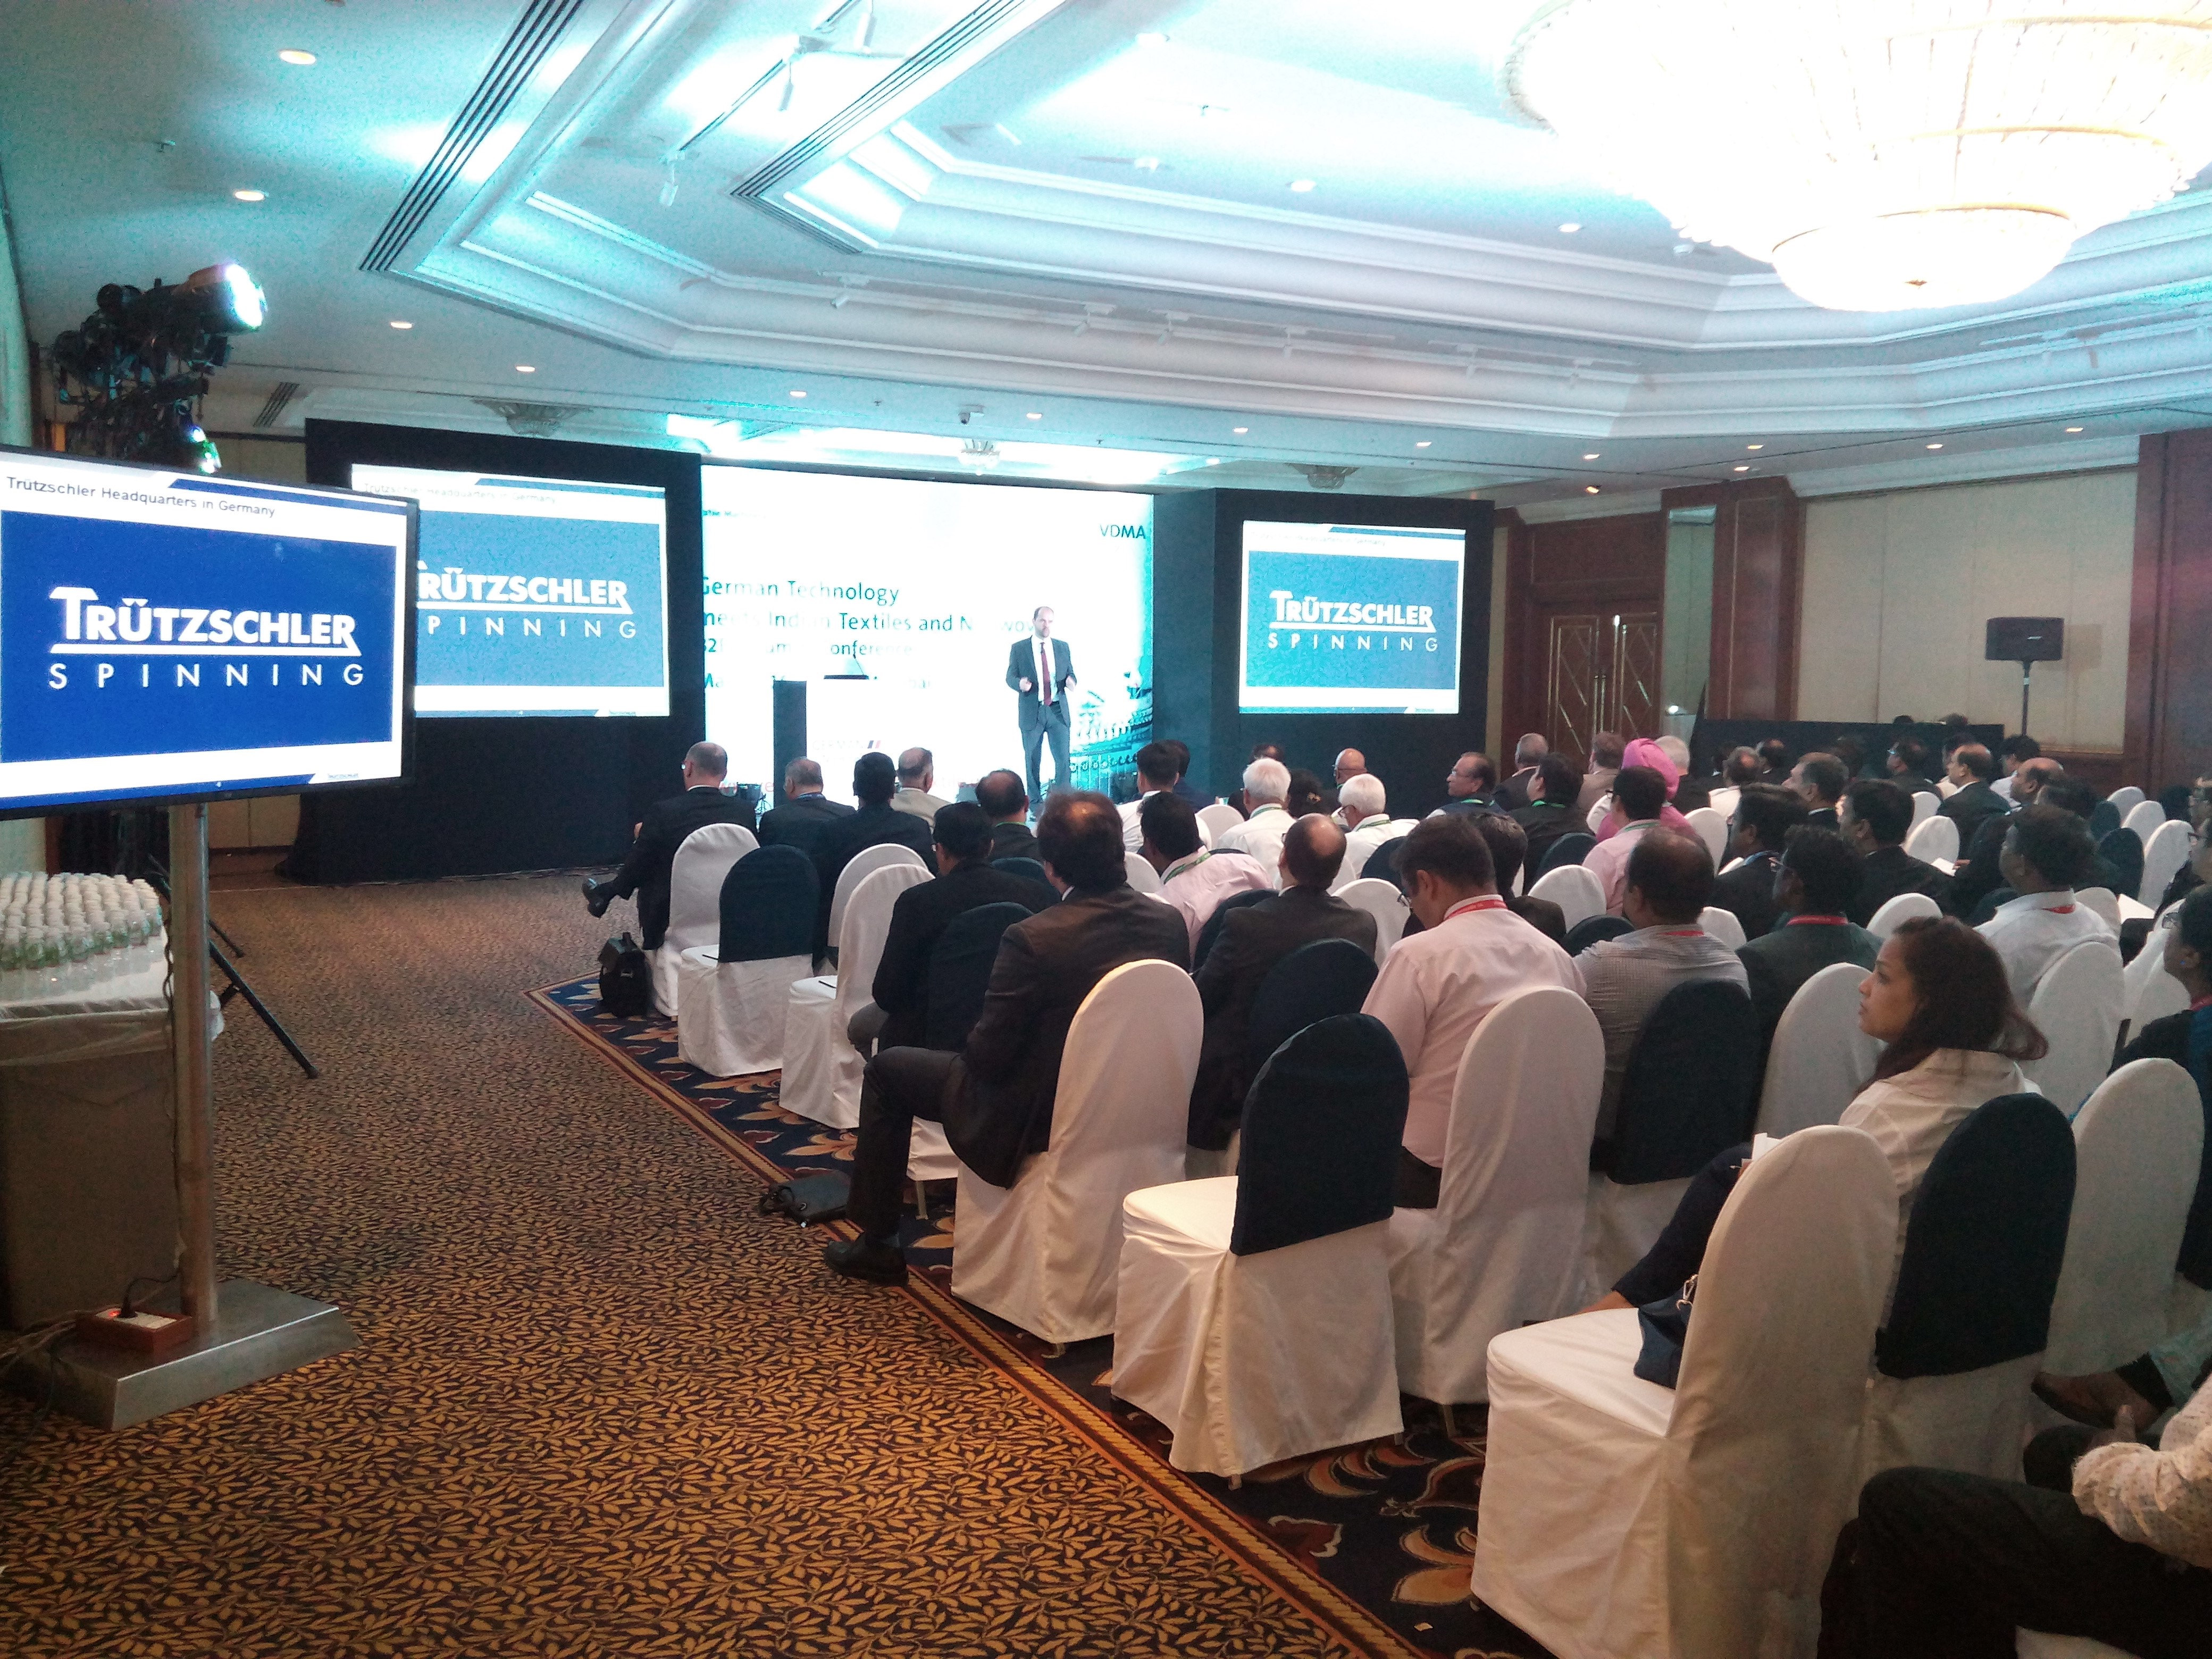 Very well received VDMA conference and B2B in Mumbai